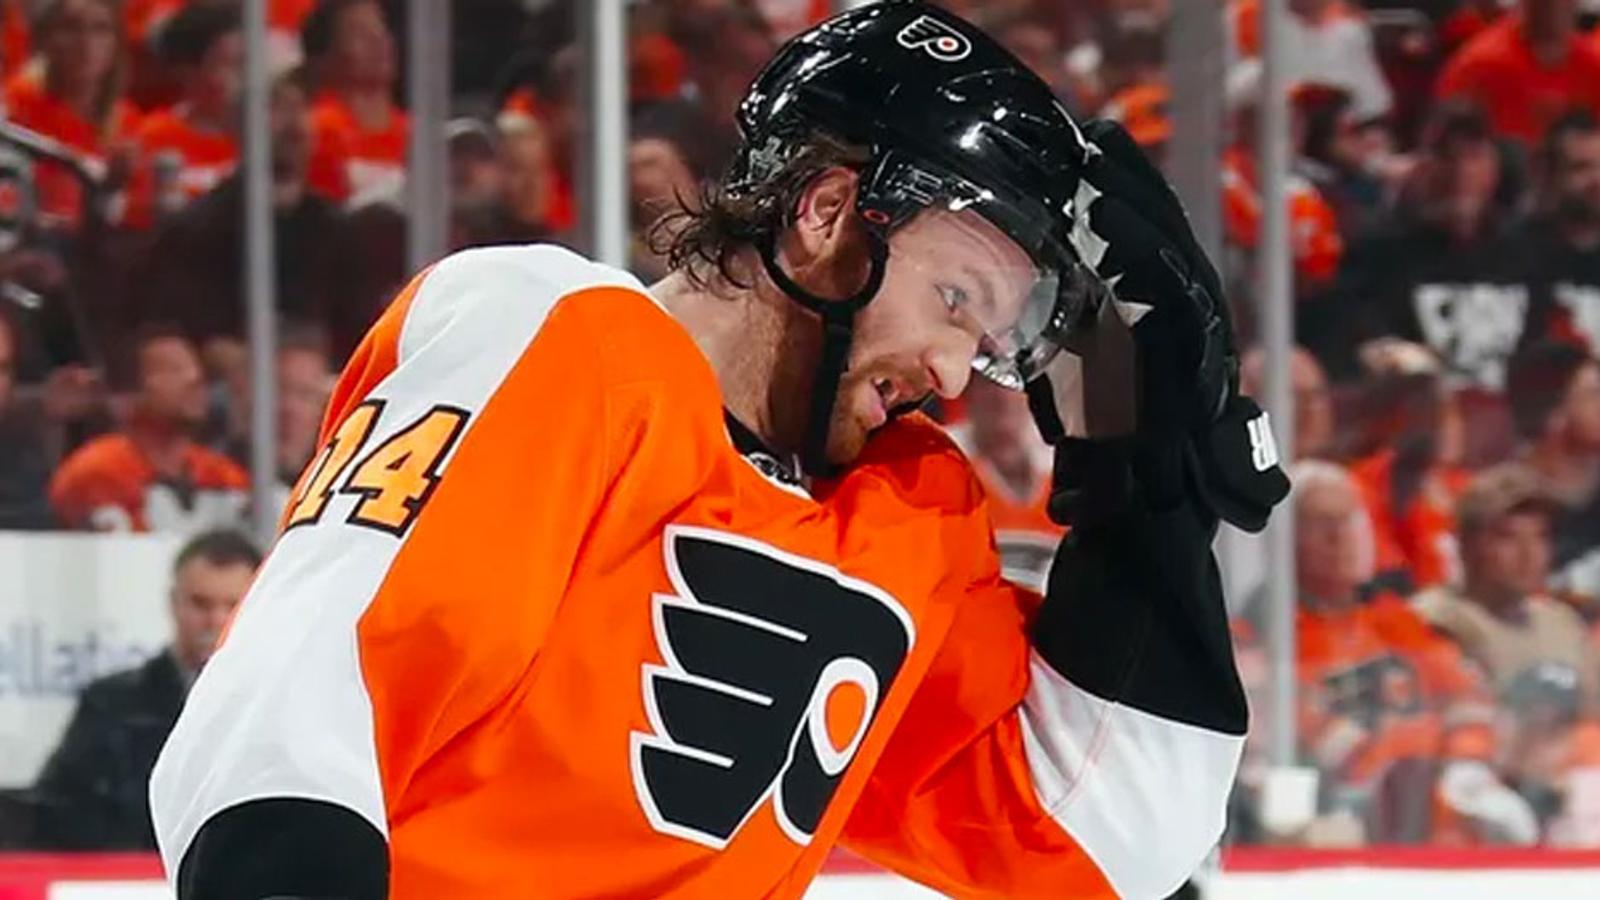 Flyers confirm the worst for Sean Couturier